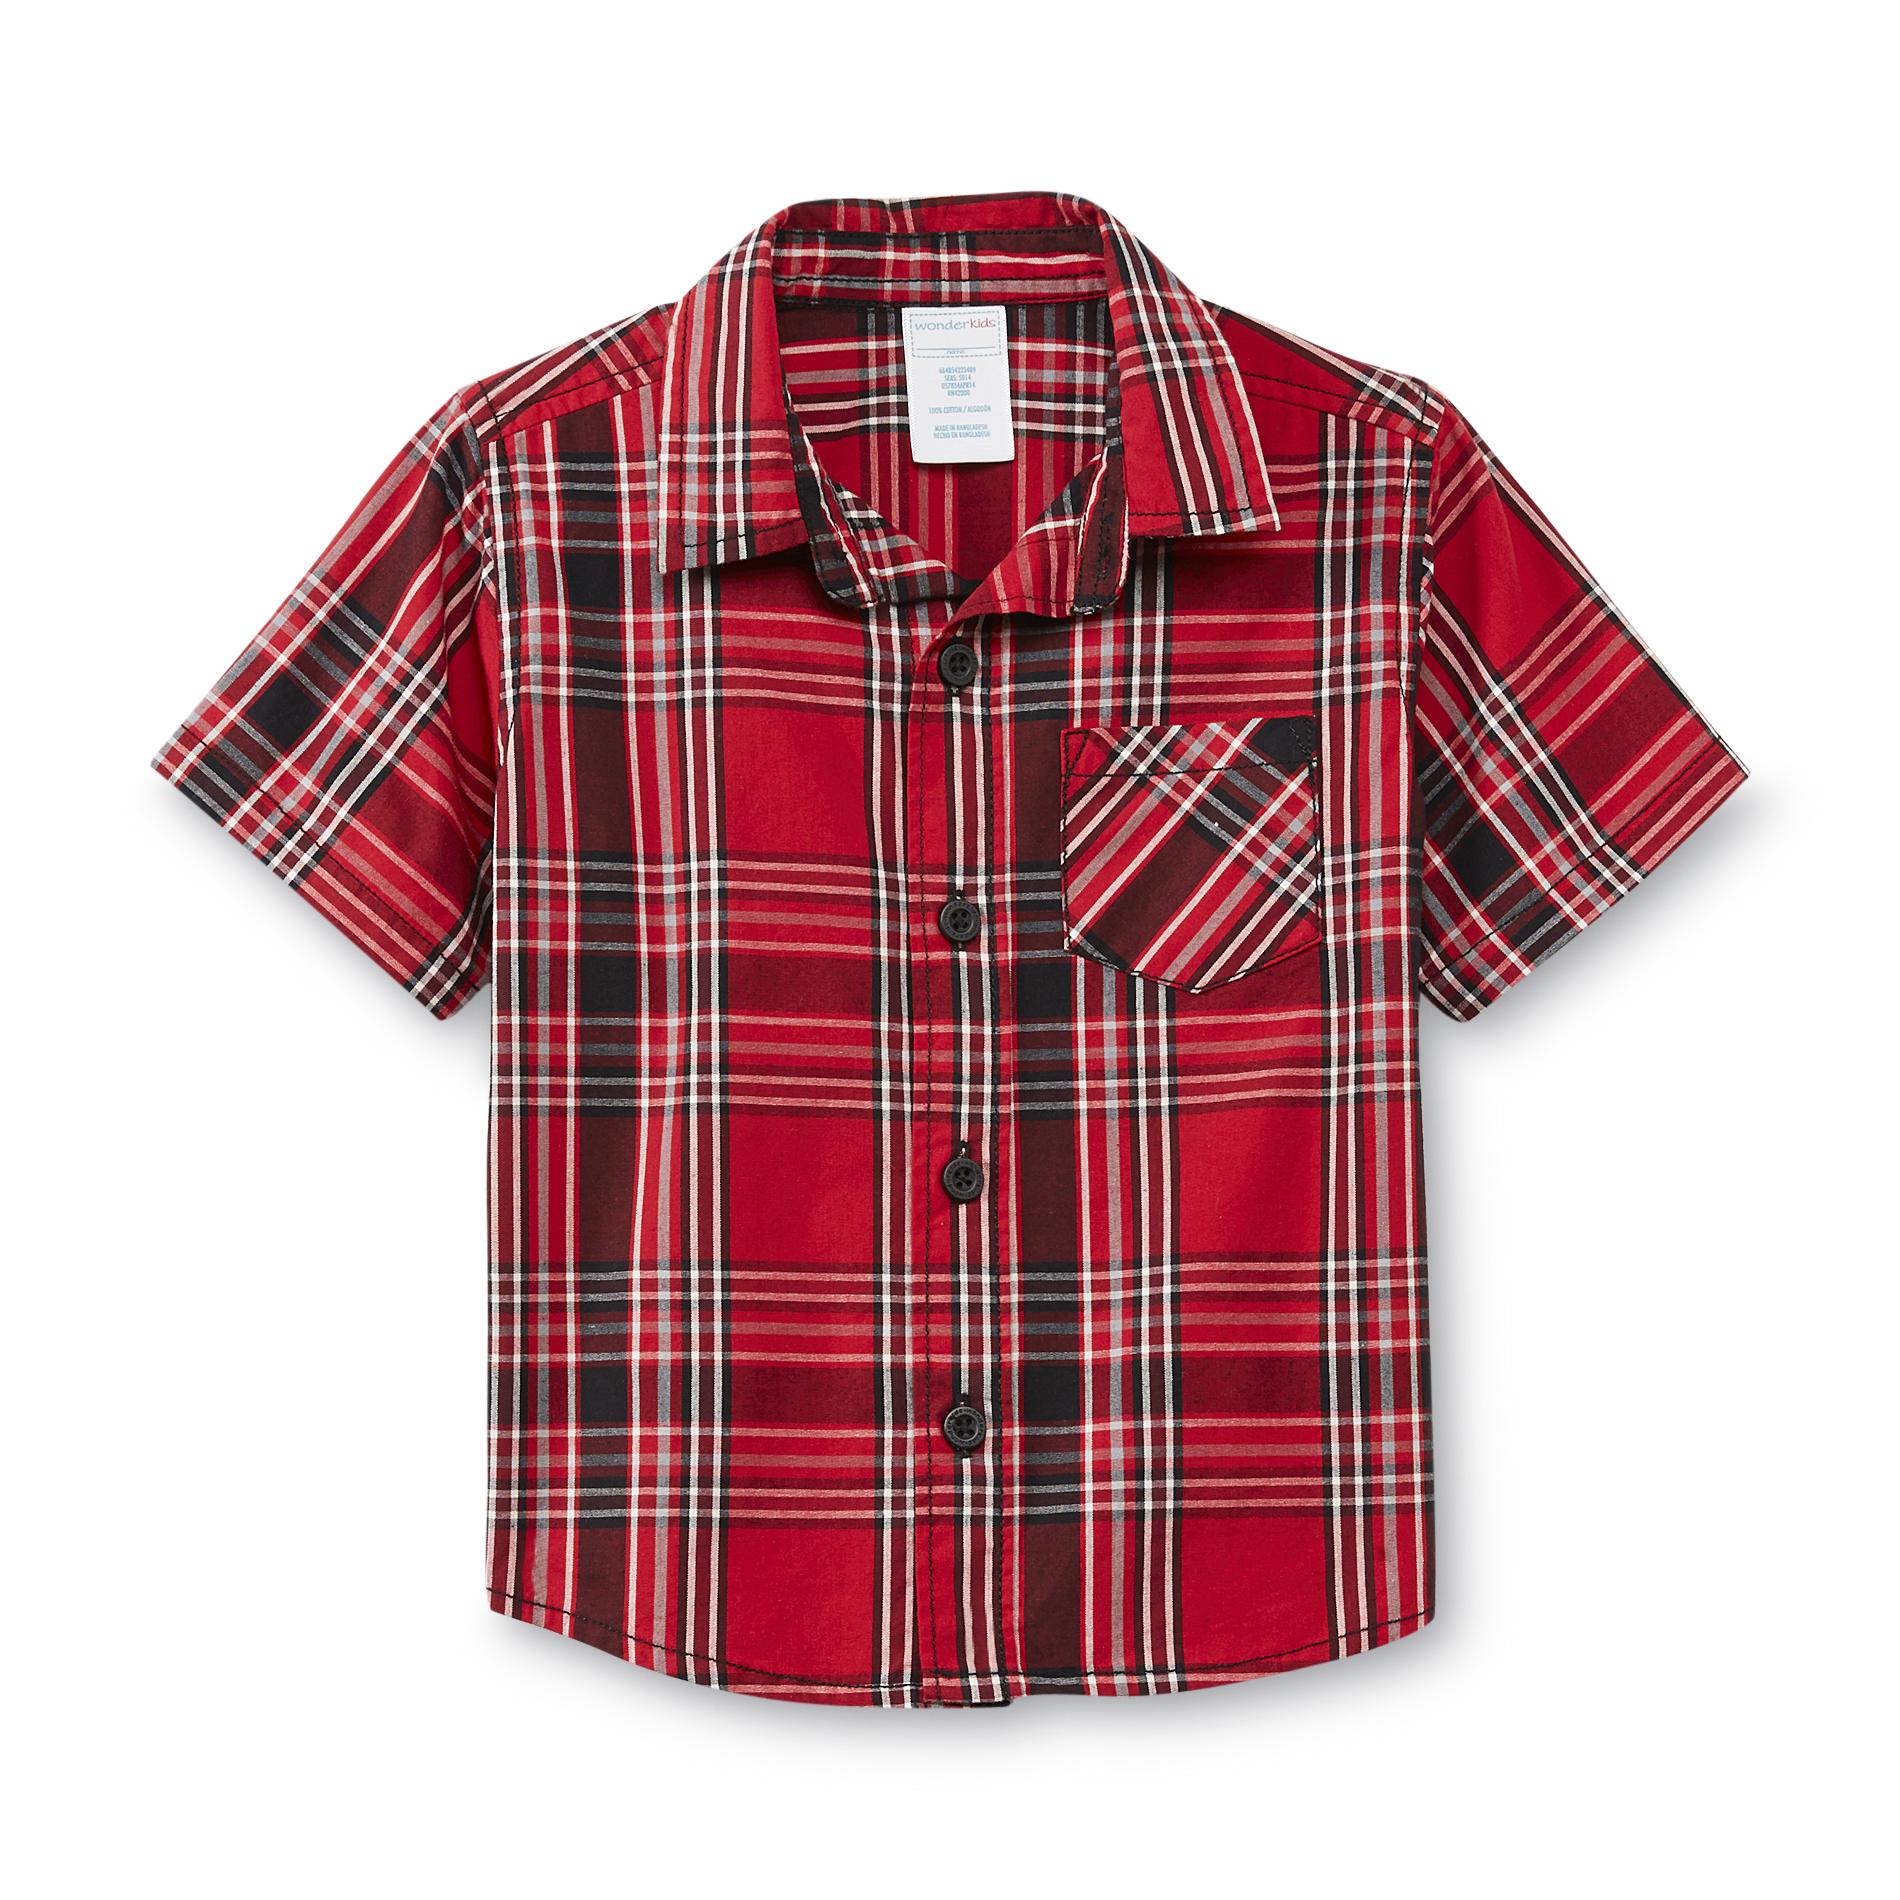 Holiday Editions Infant & Toddler Boy's Button-Front Shirt - Plaid